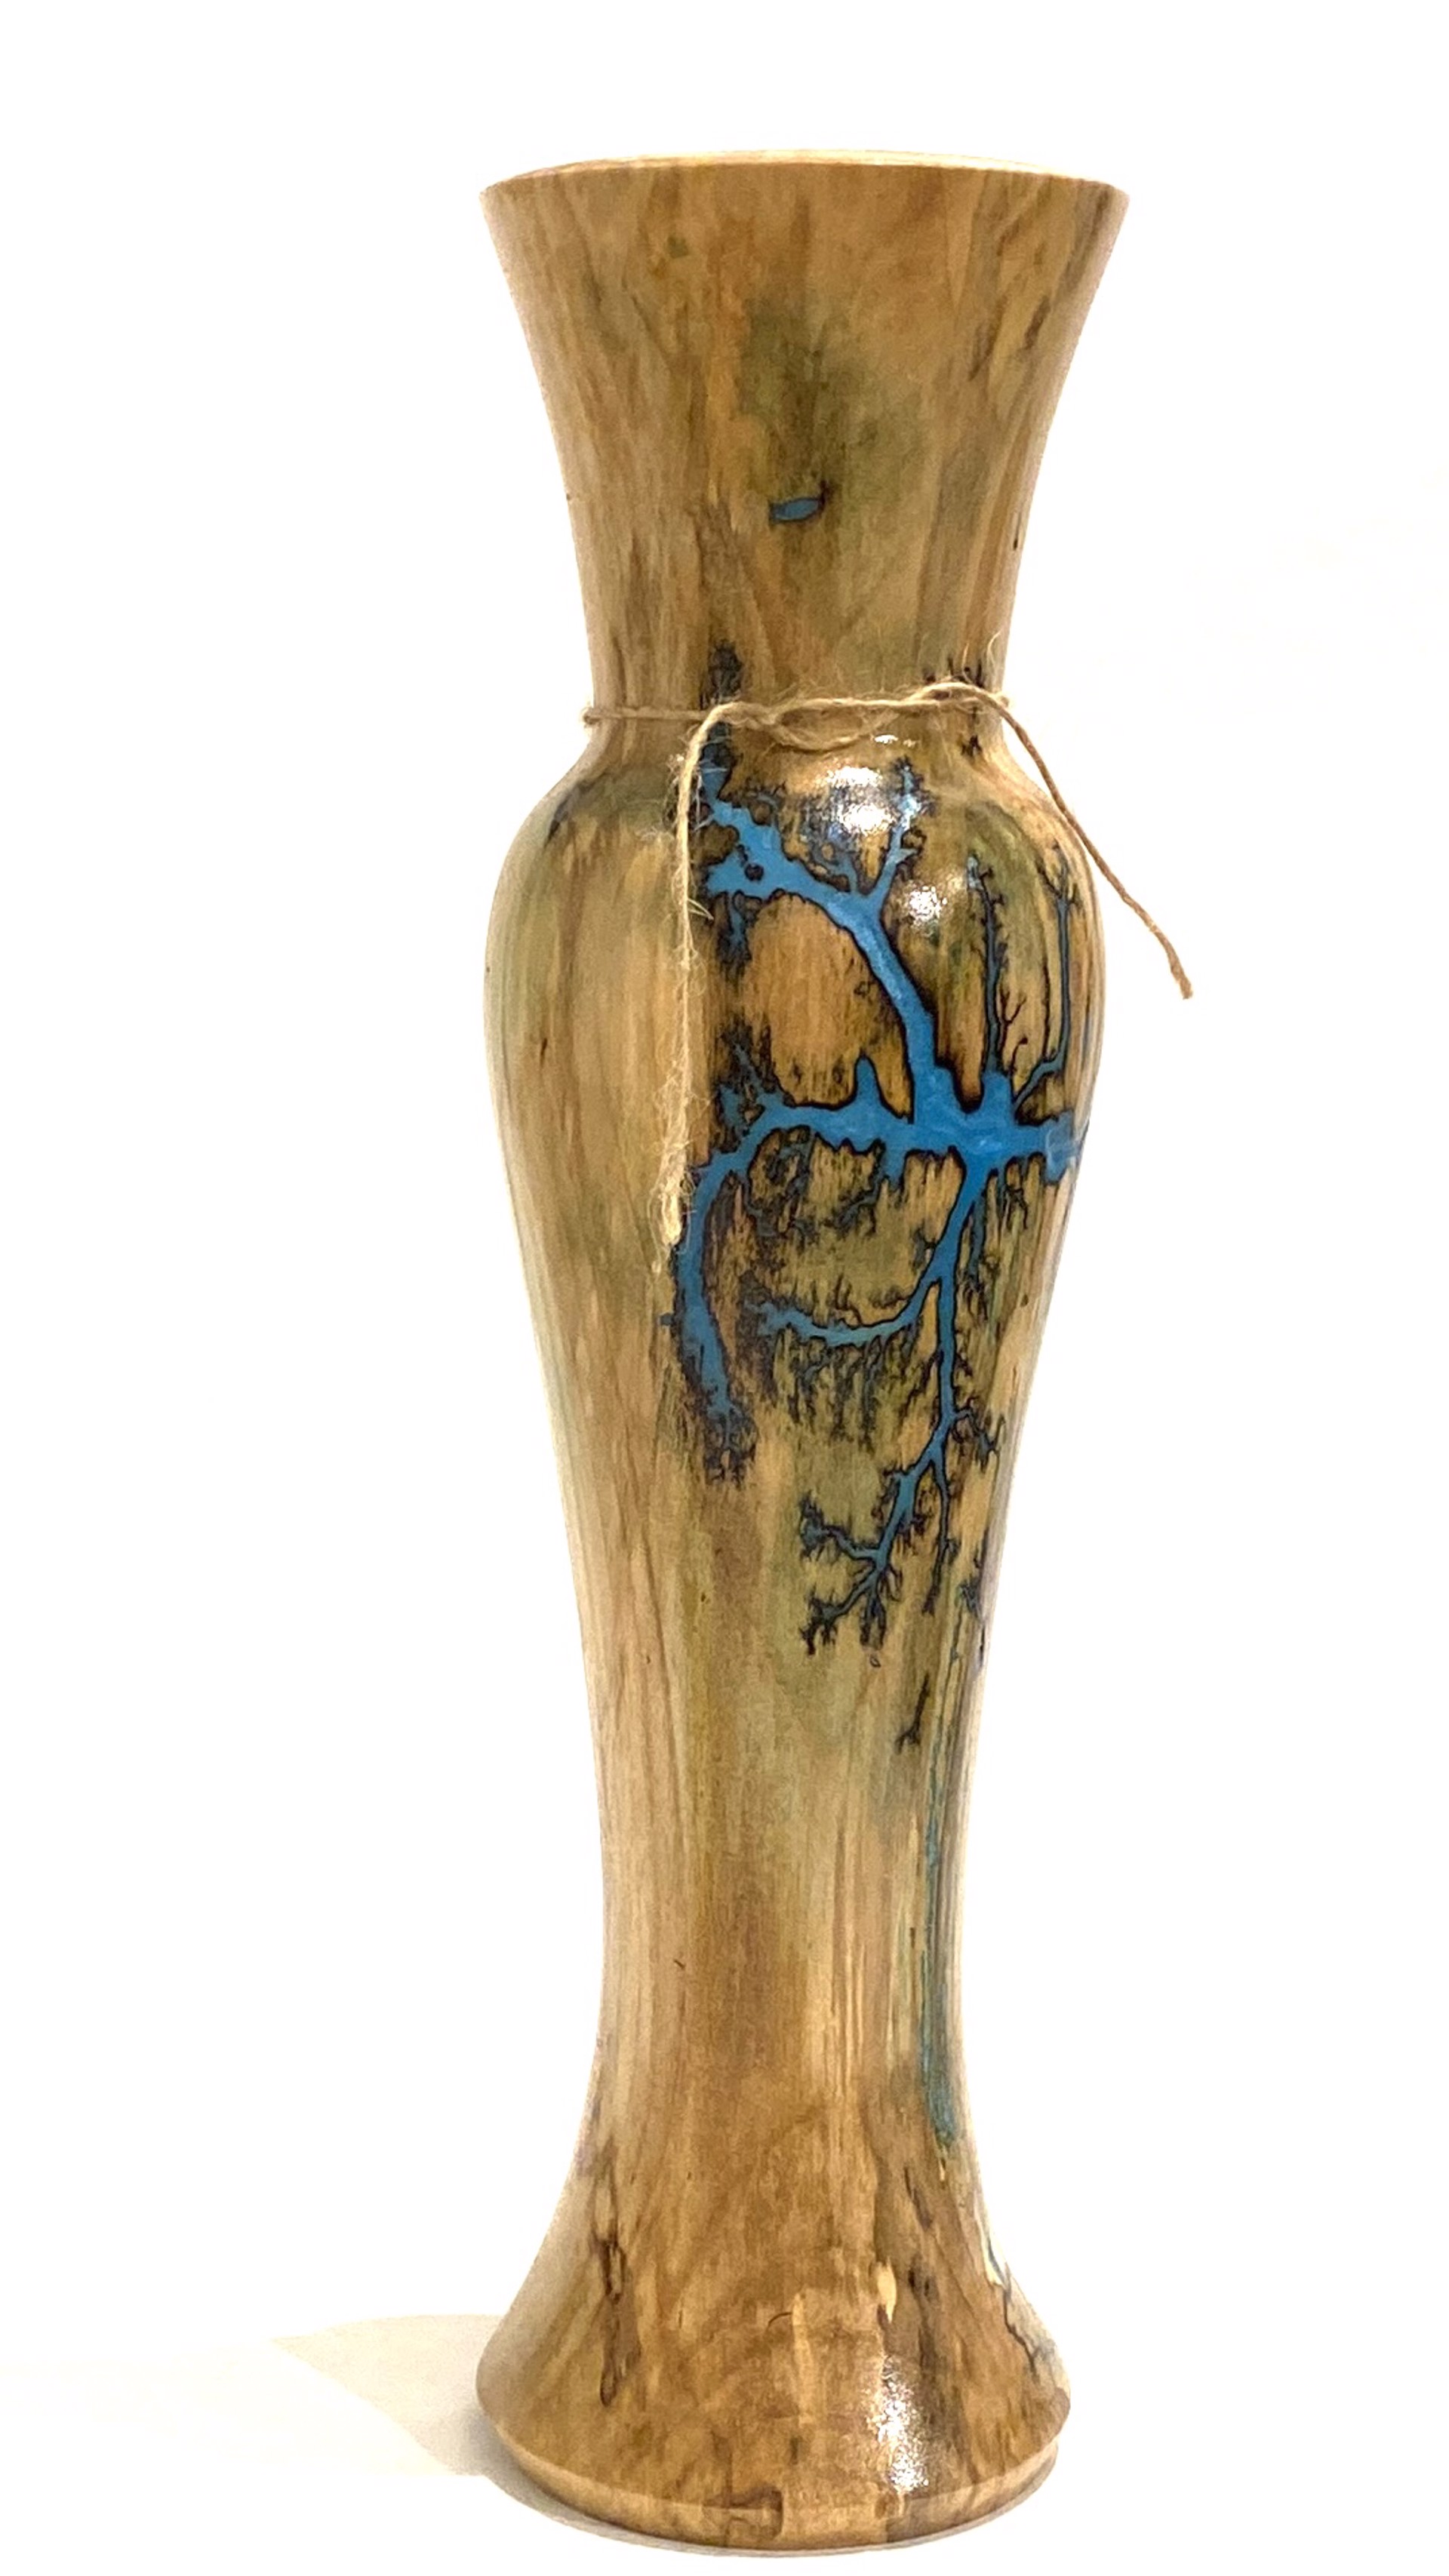 Vase HB23-8 by Hart Brothers